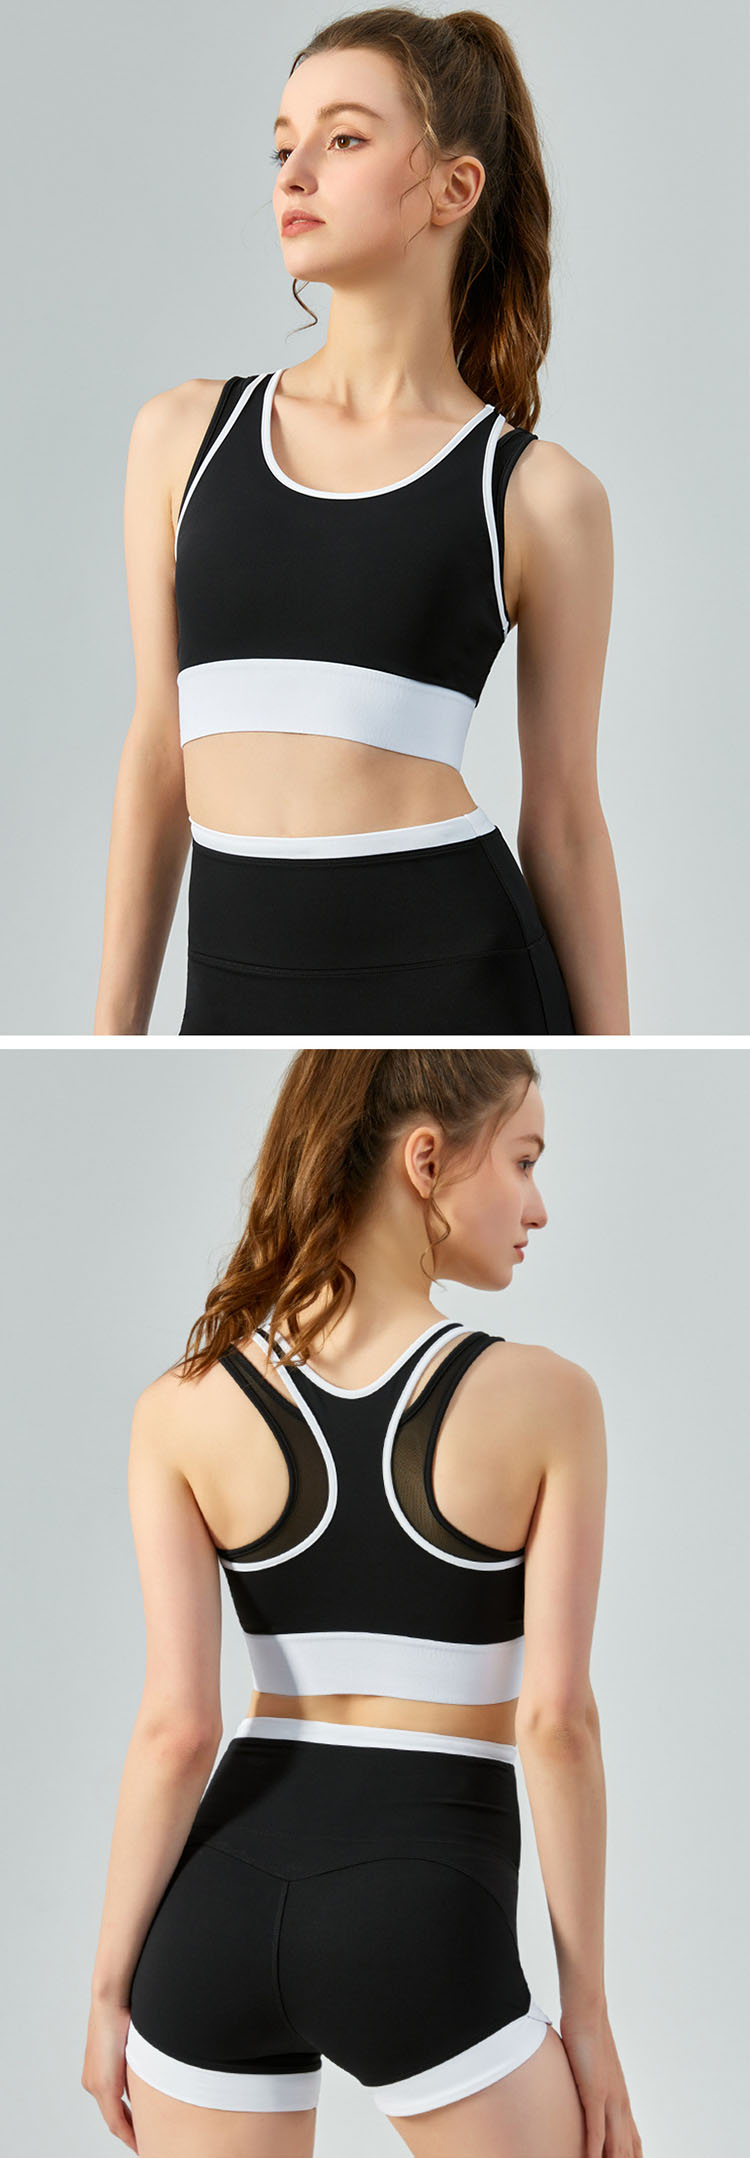 High-quality fabrics are used to absorb moisture and sweat, and the exercise experience is enjoyable.